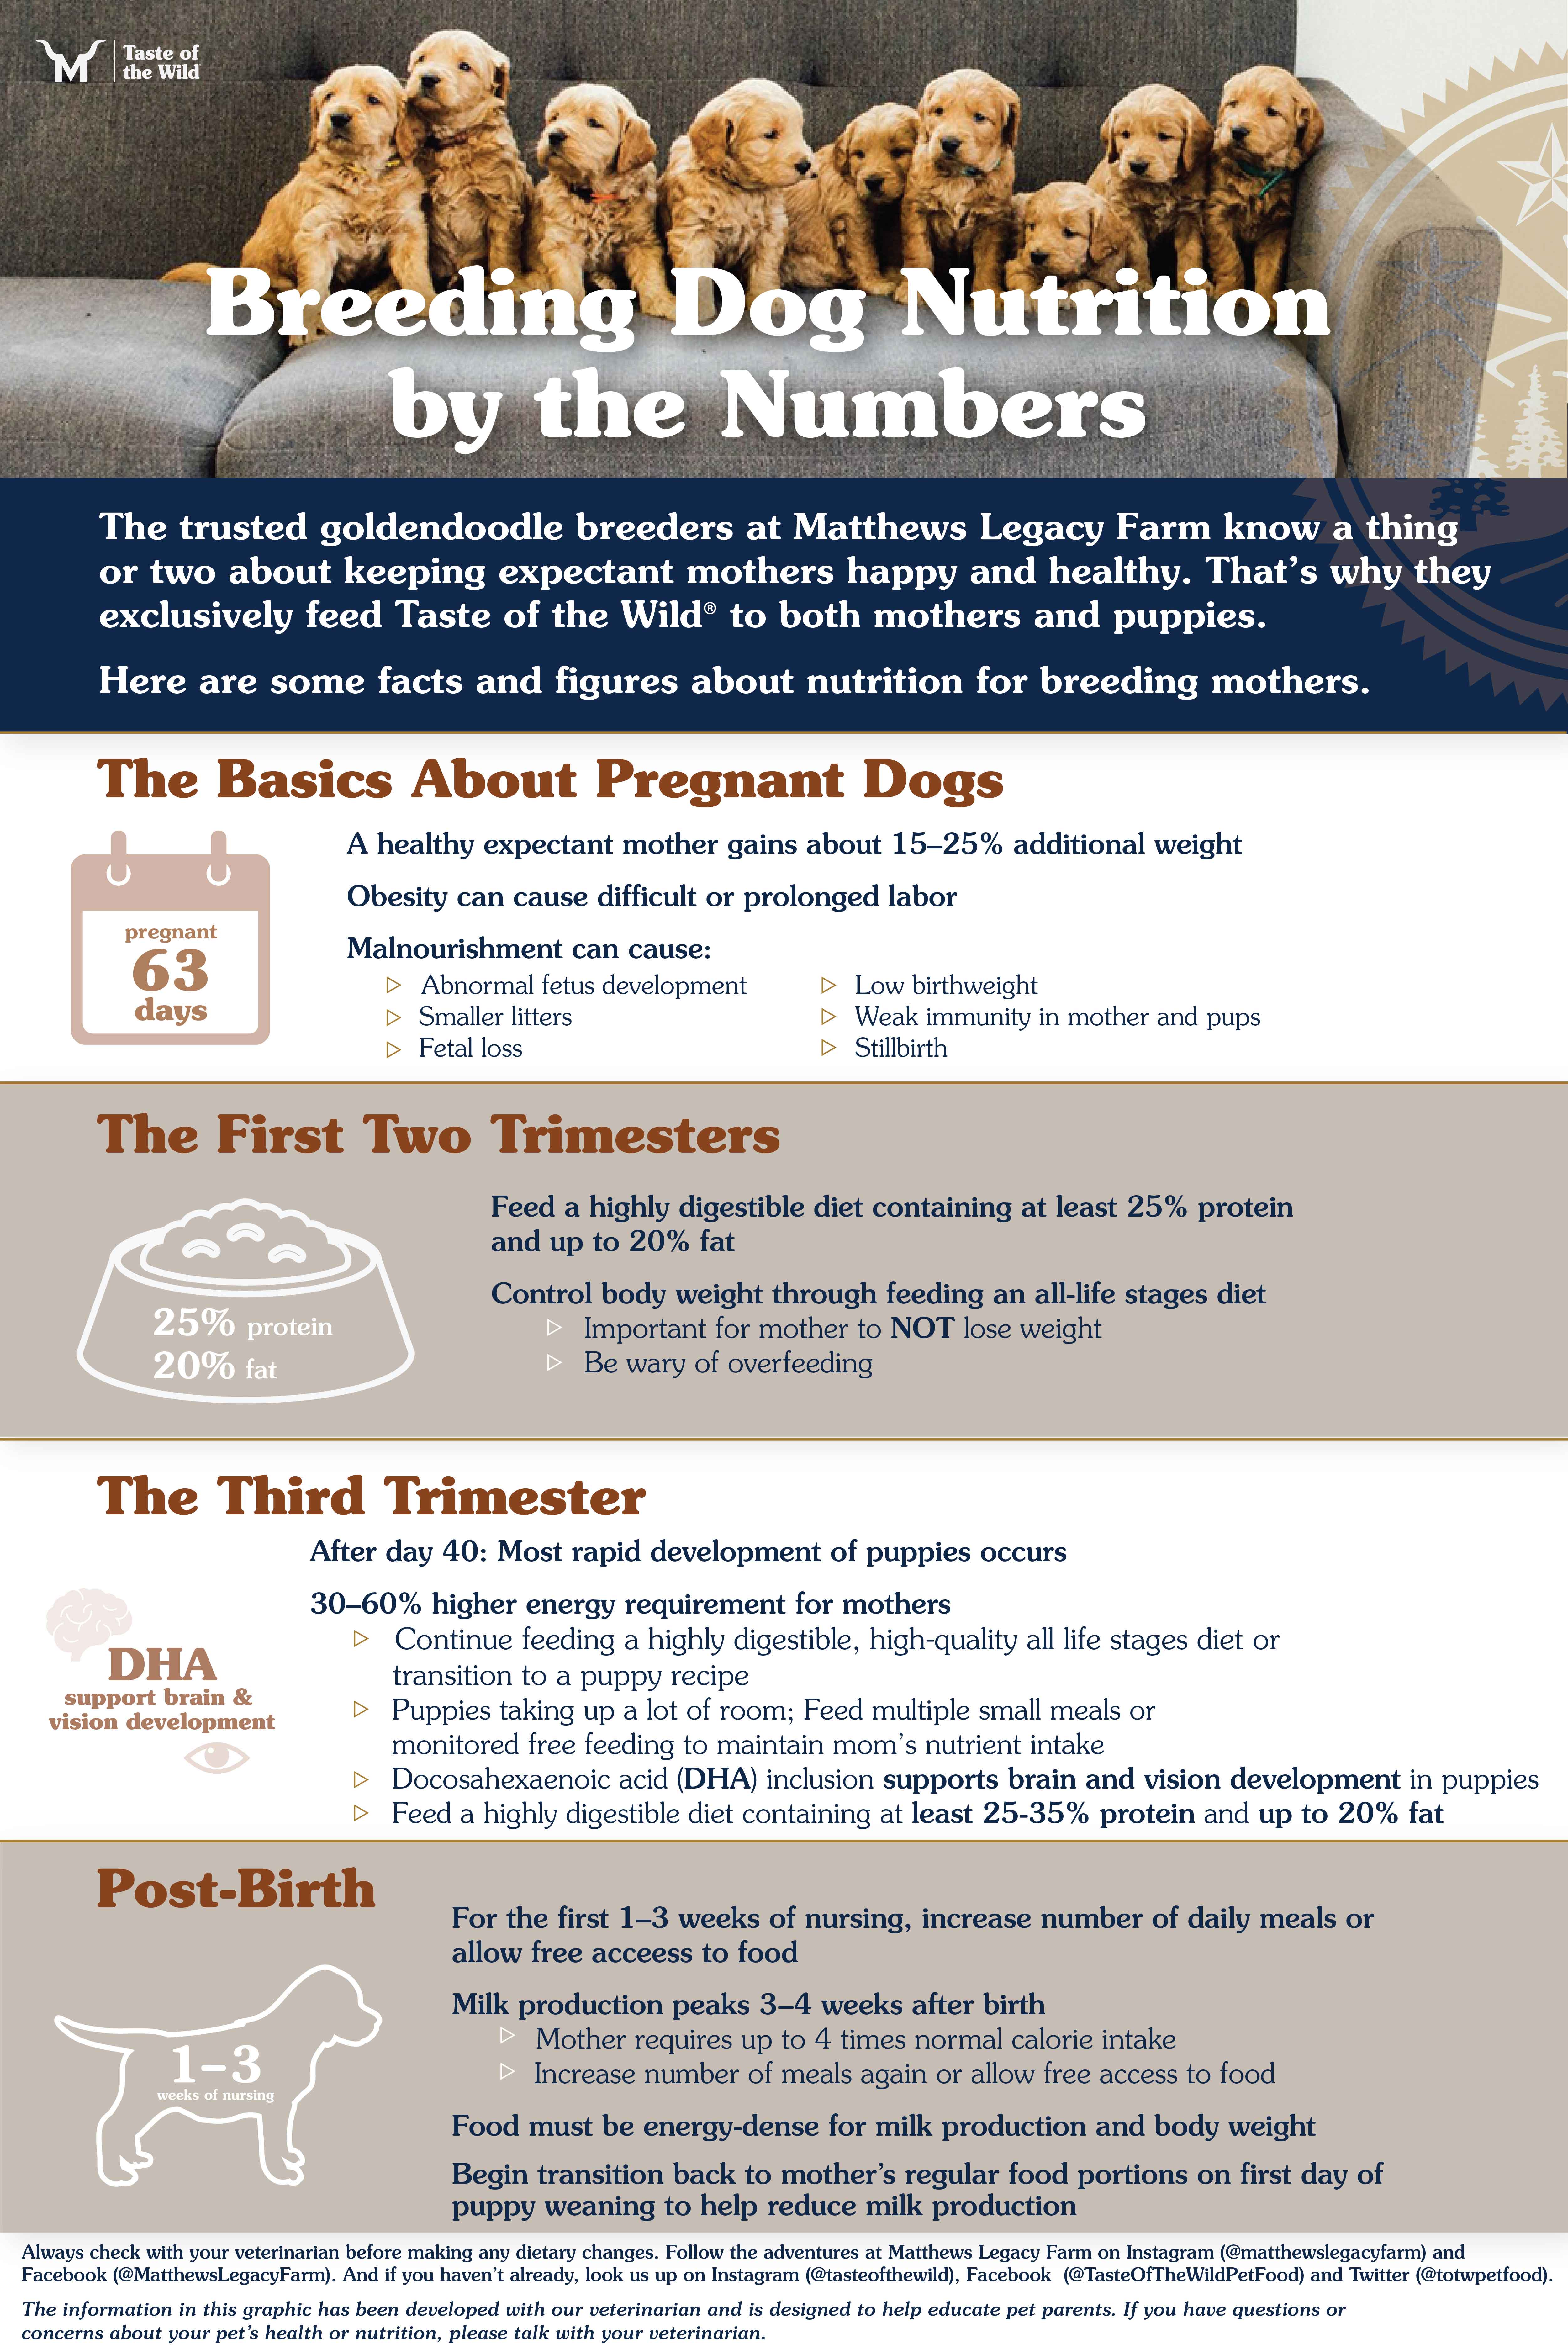 An interior infographic detailing various facts about breeding dog nutrition.